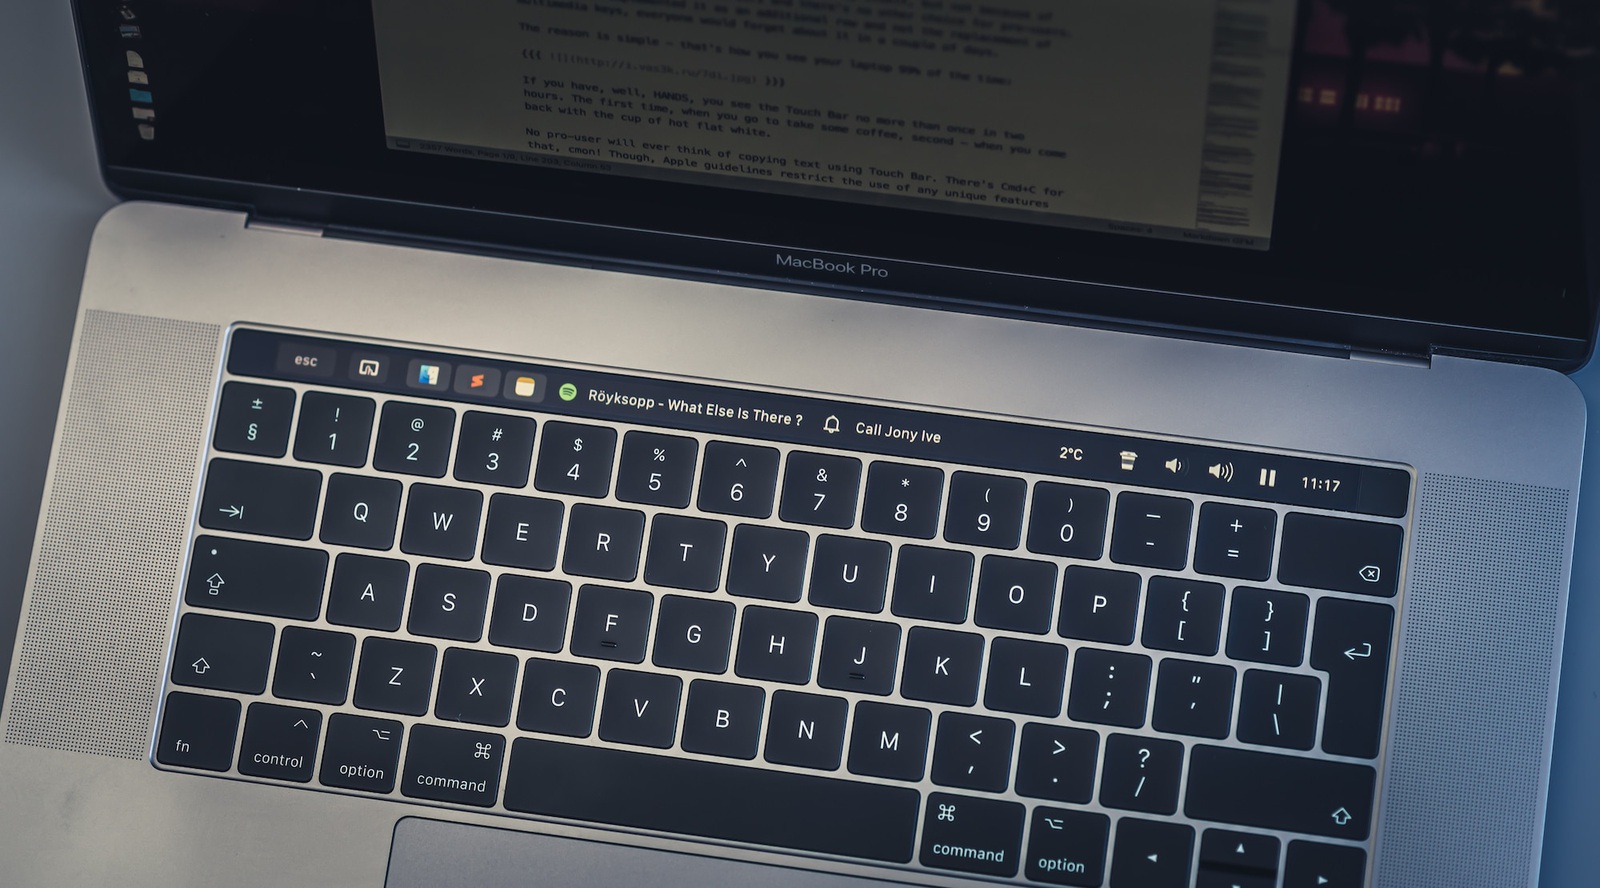 Dissatisfied, developer creates preset to completely change Touch Bar - and you can get it!